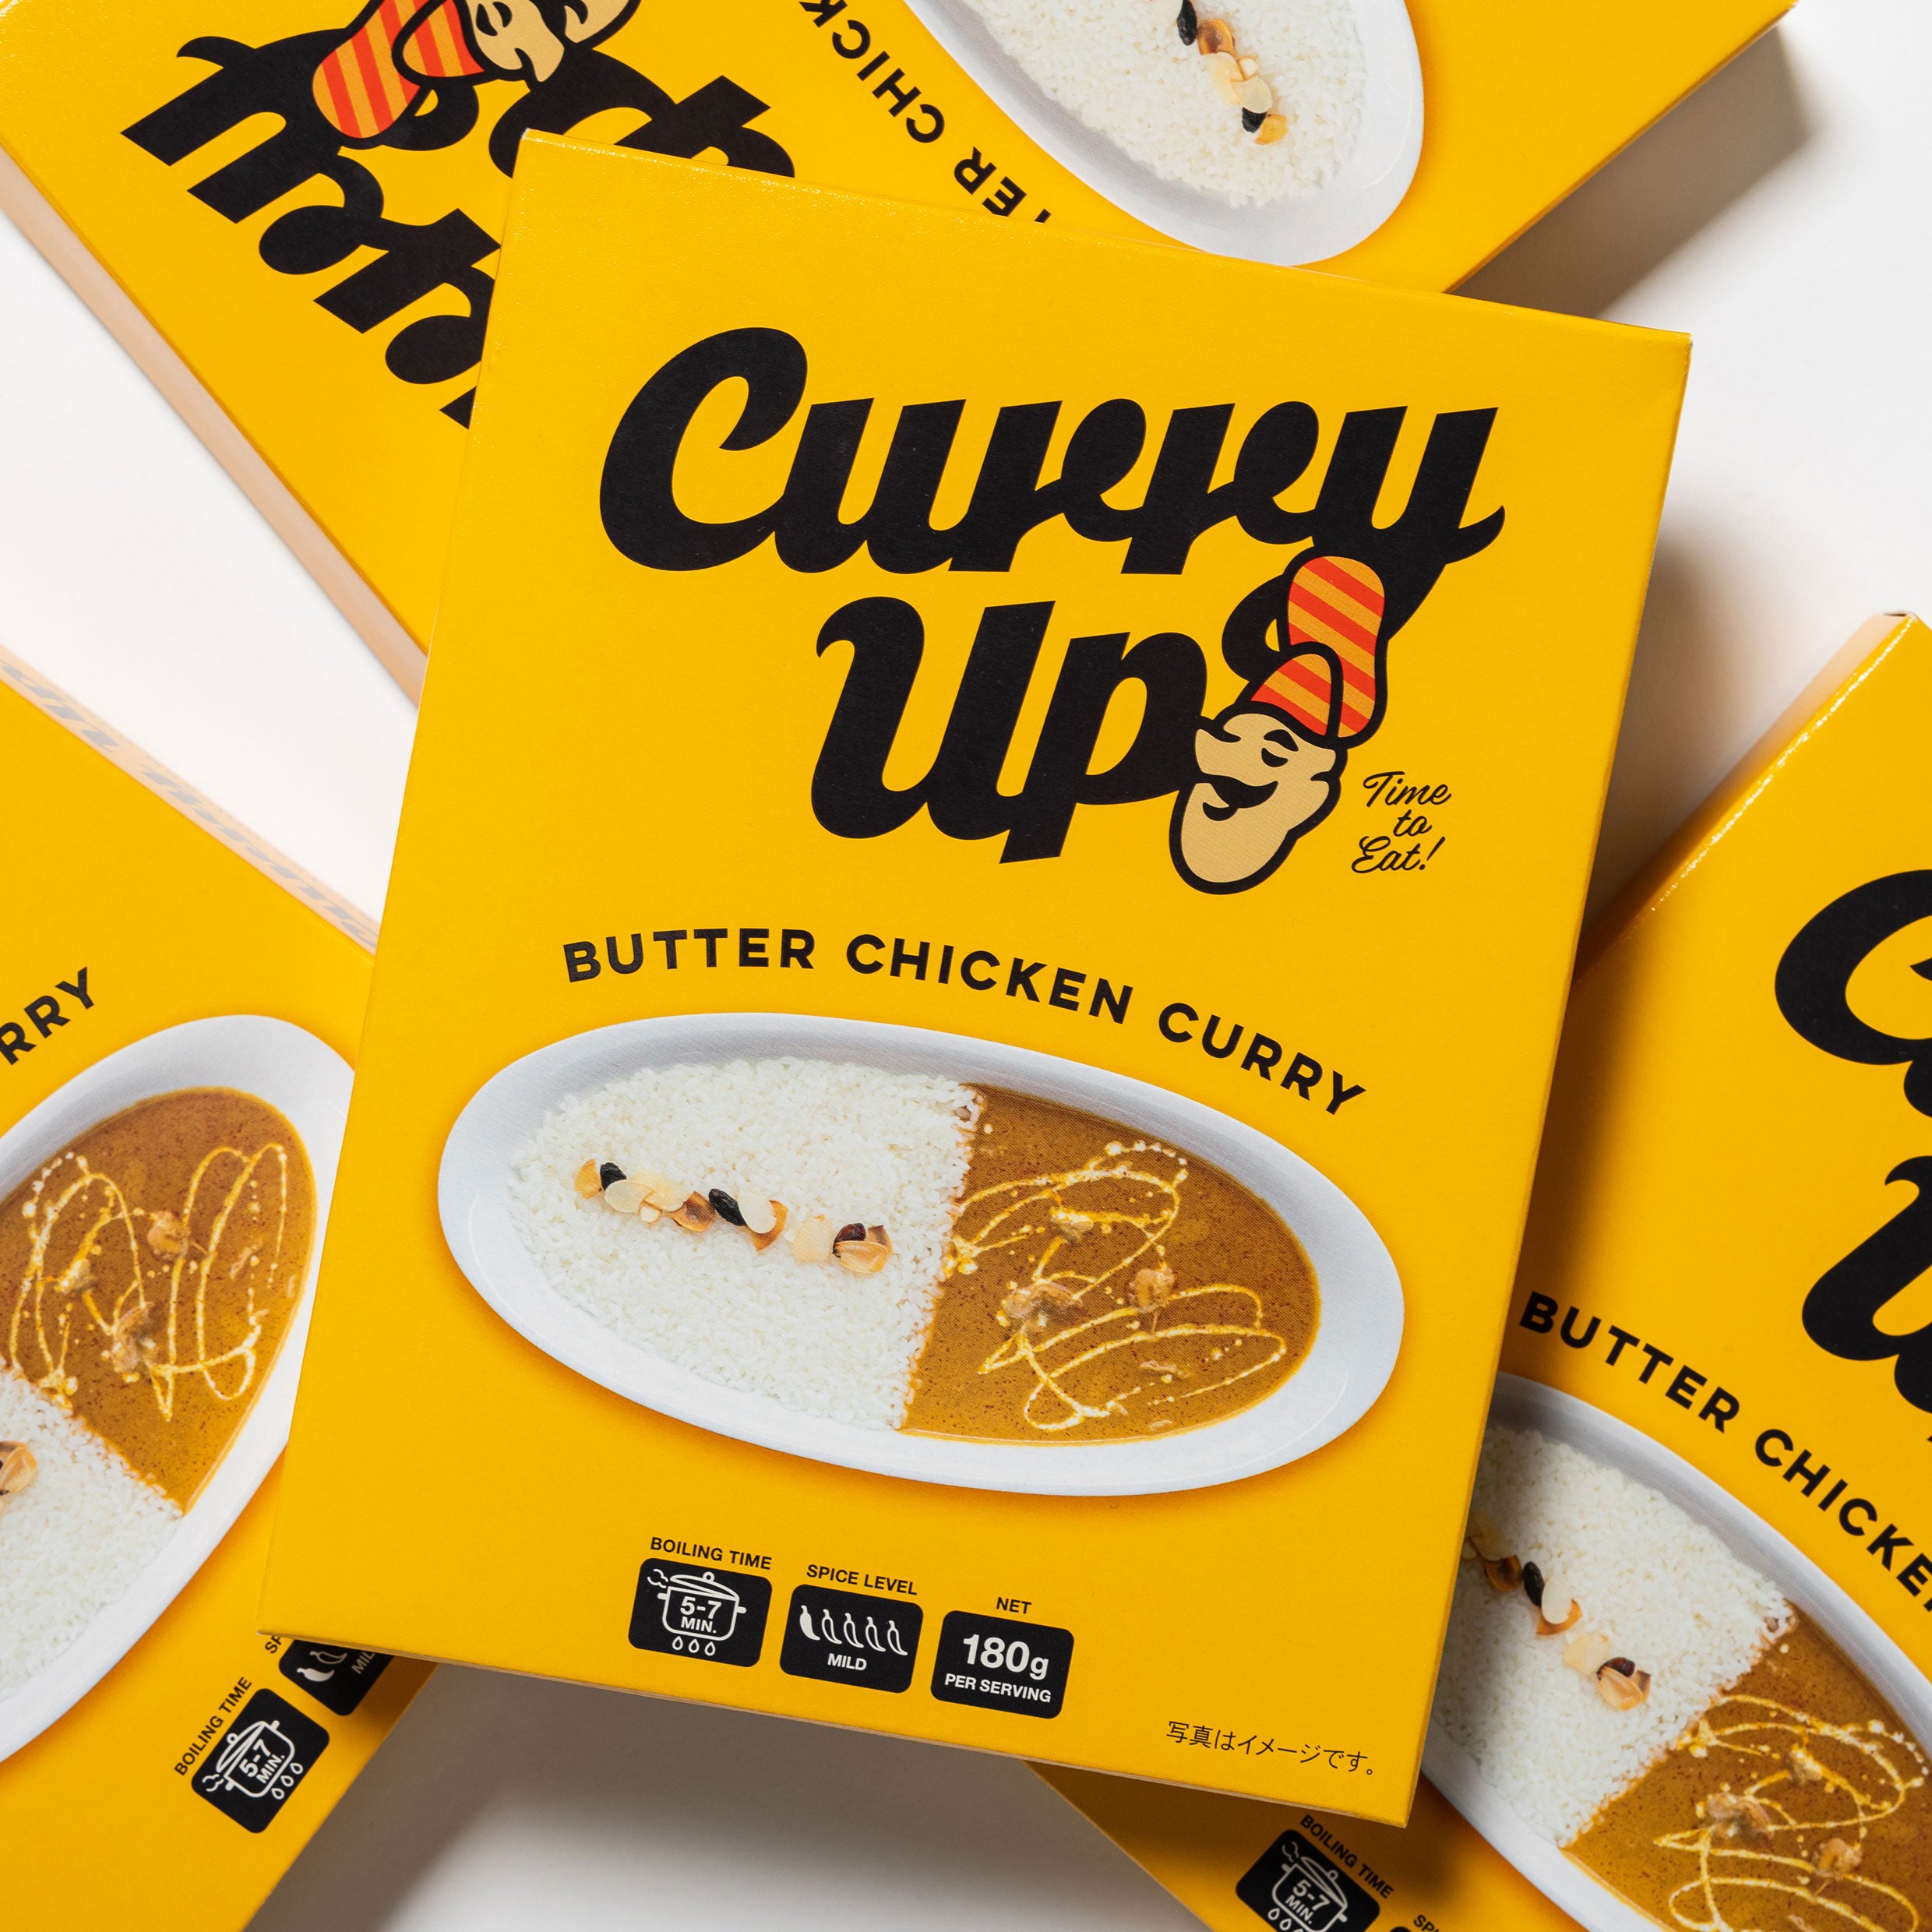 CURRY UP 初となるレトルトカレー「CURRY UP BUTTER CHICKEN CURRY」発売のお知らせ – HUMAN MADE